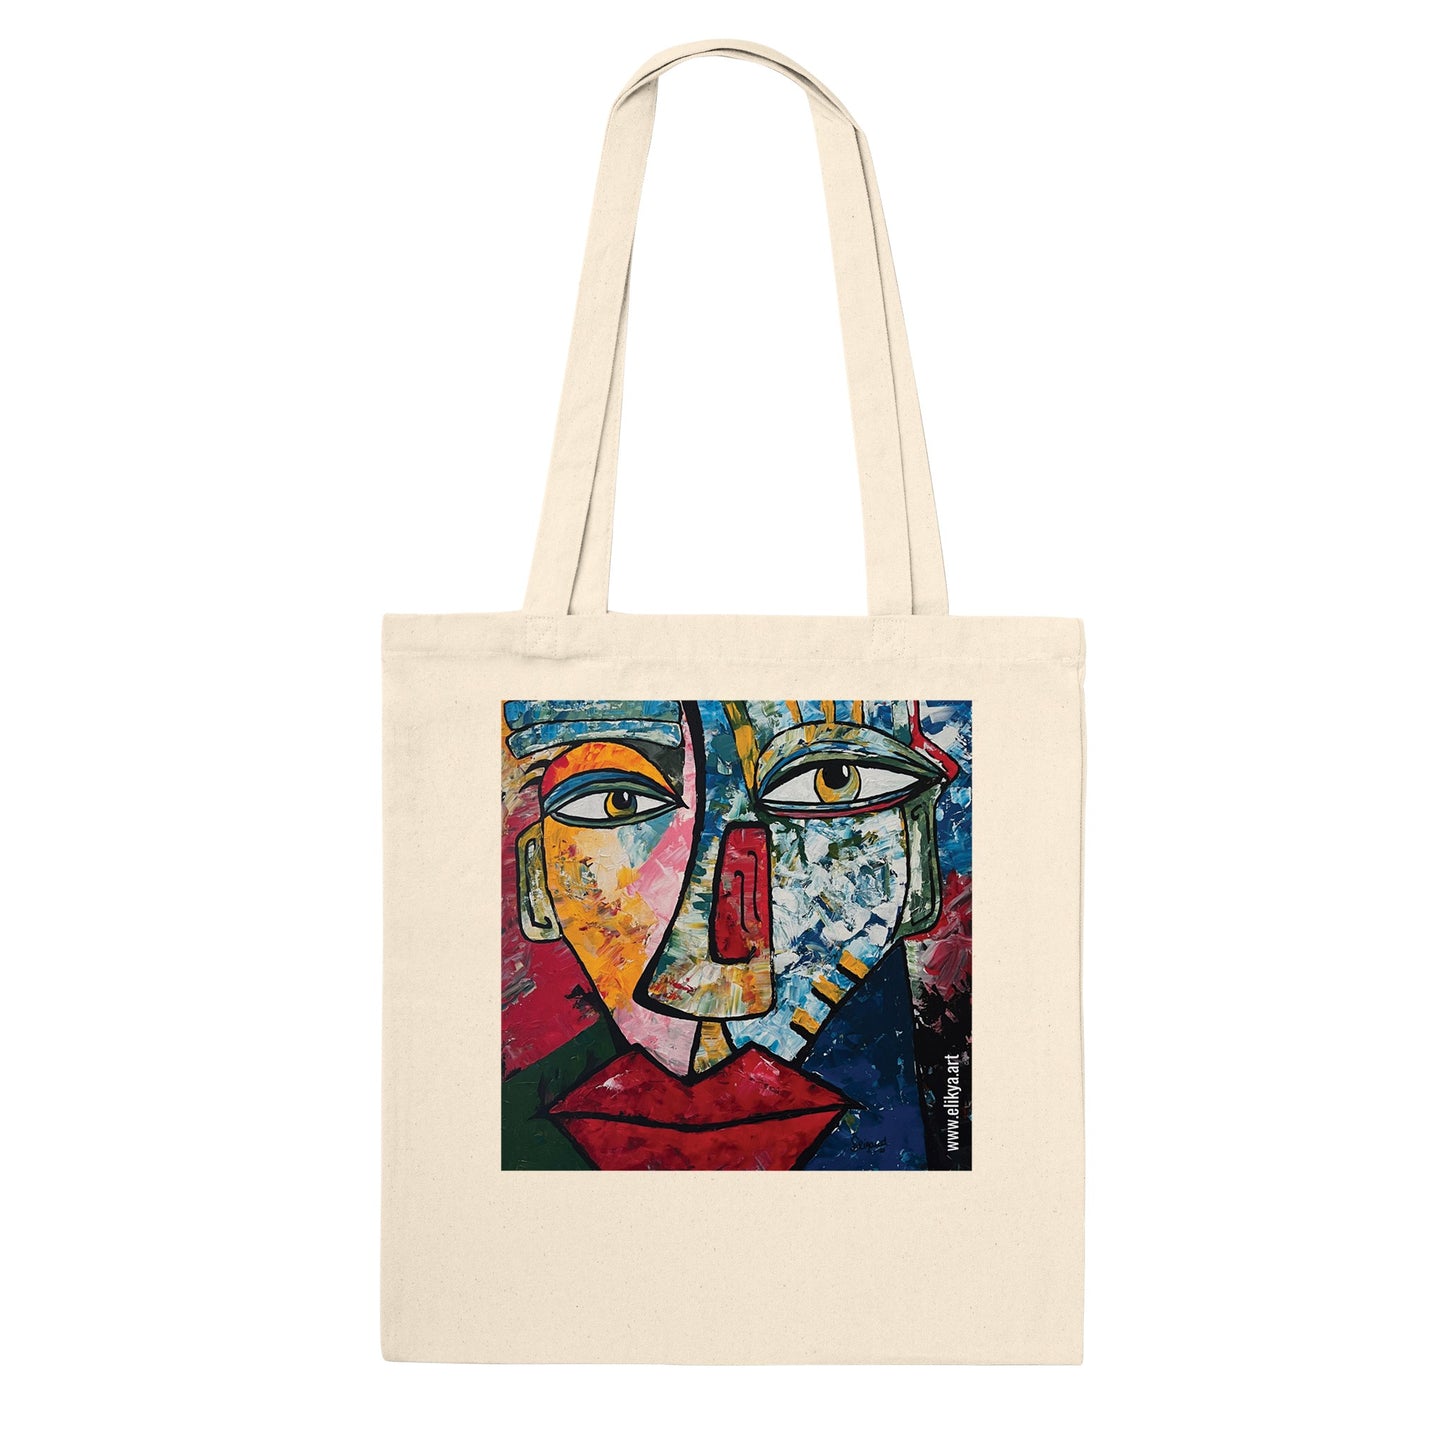 "The Equalizer" Tote Bag